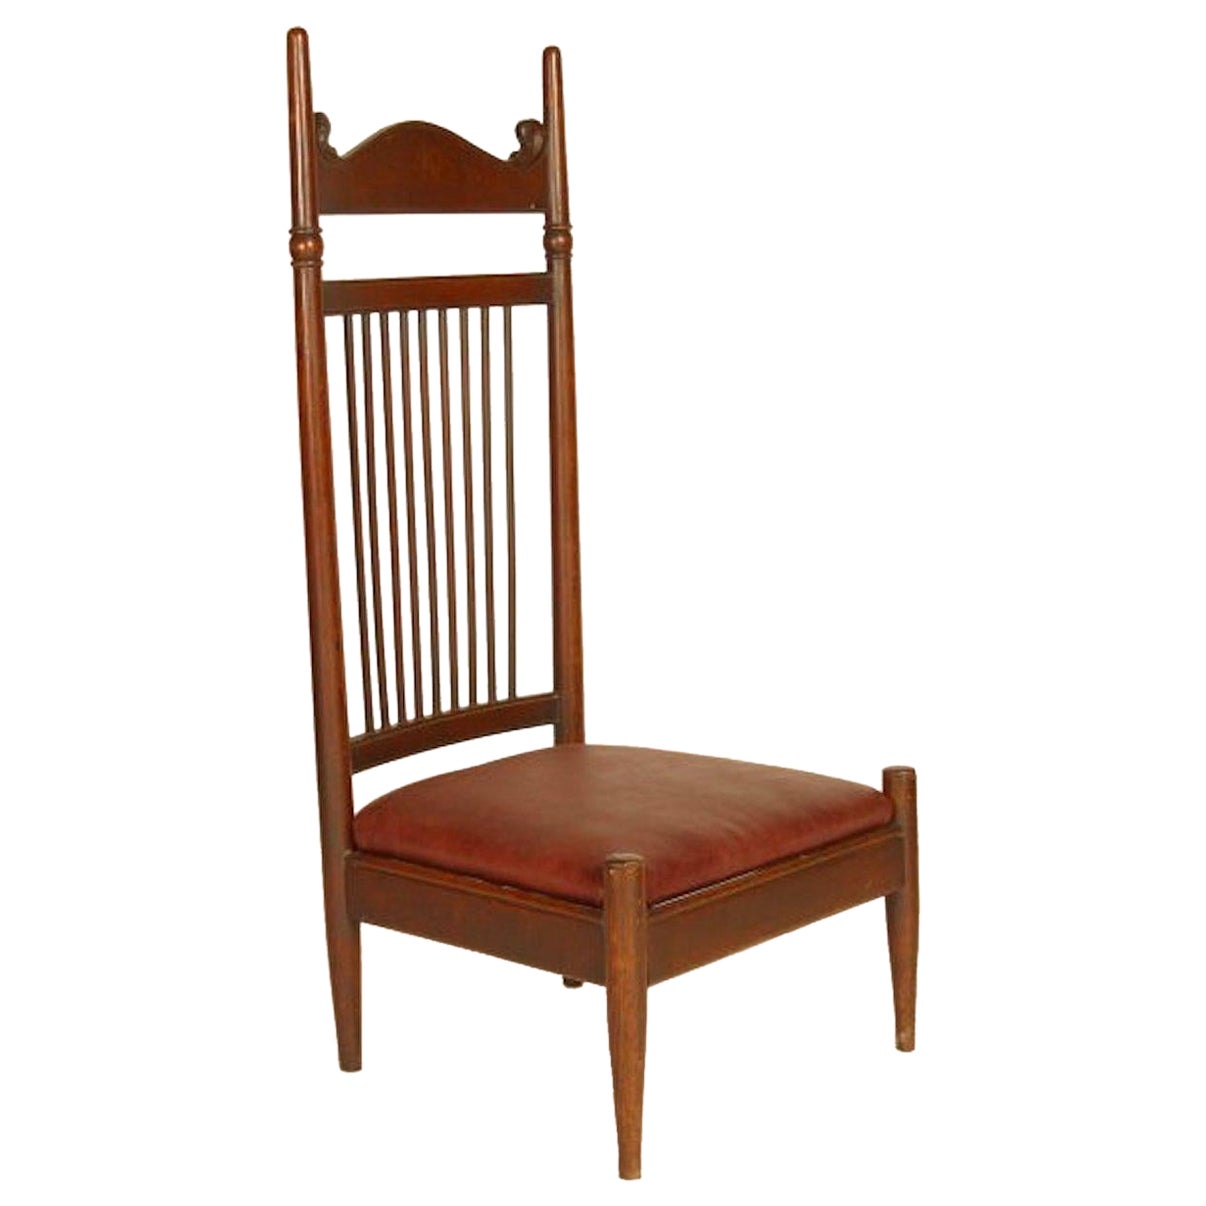 E W Godwin Style of, an Aesthetic Movement Oak High Back Low Seat Chair For Sale